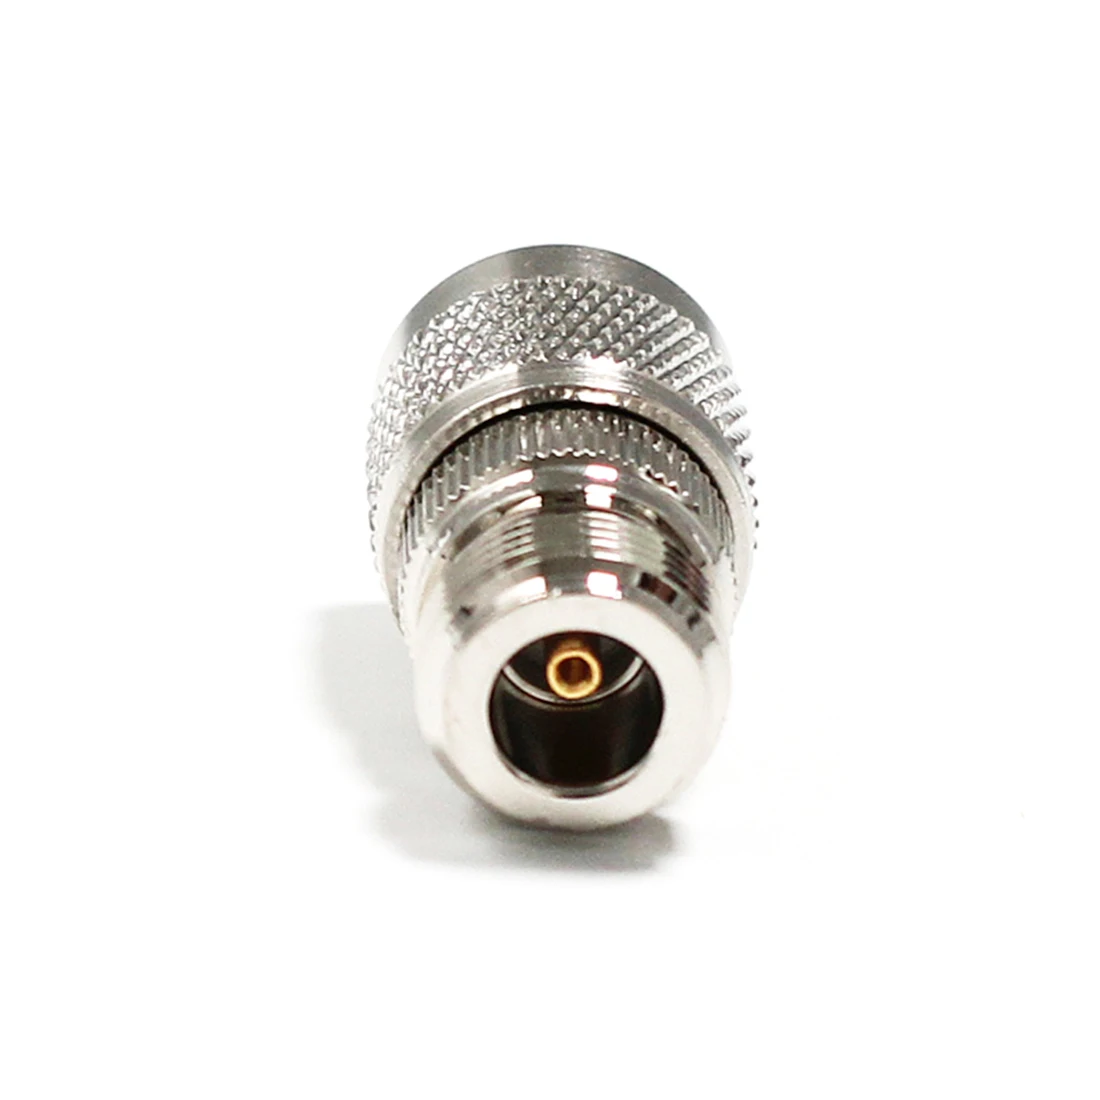 

1pc N Male Plug to Female Jack RF Coax Adapter Convertor Connector Coupler Straight Nickelplated NEW Wholesale